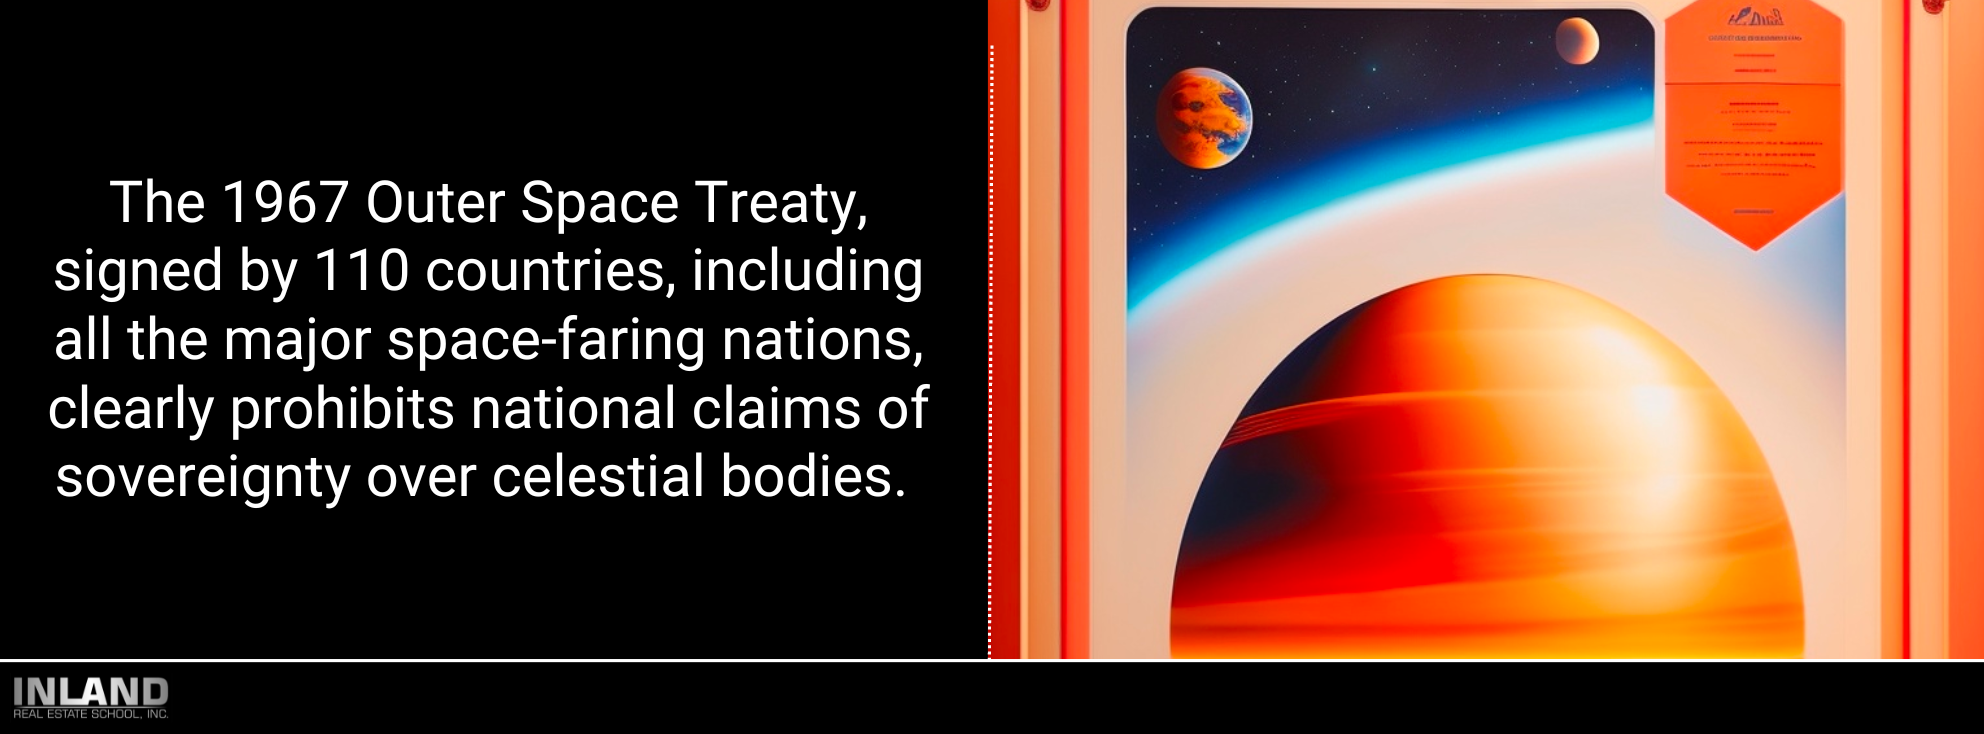 Close-up of the 1967 Outer Space Treaty document, with a celestial body (Mars) in the background.